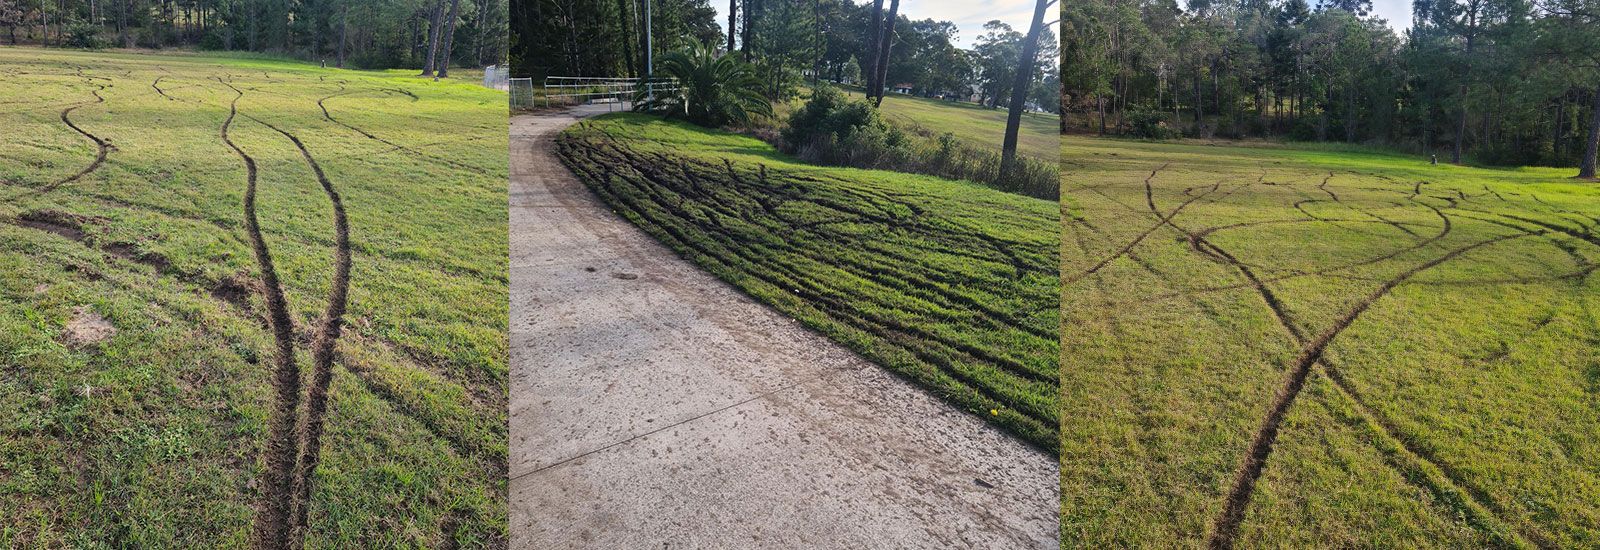 Damage caused by motorbikes to grass at Boomerang Park Raymond Terrace banner image